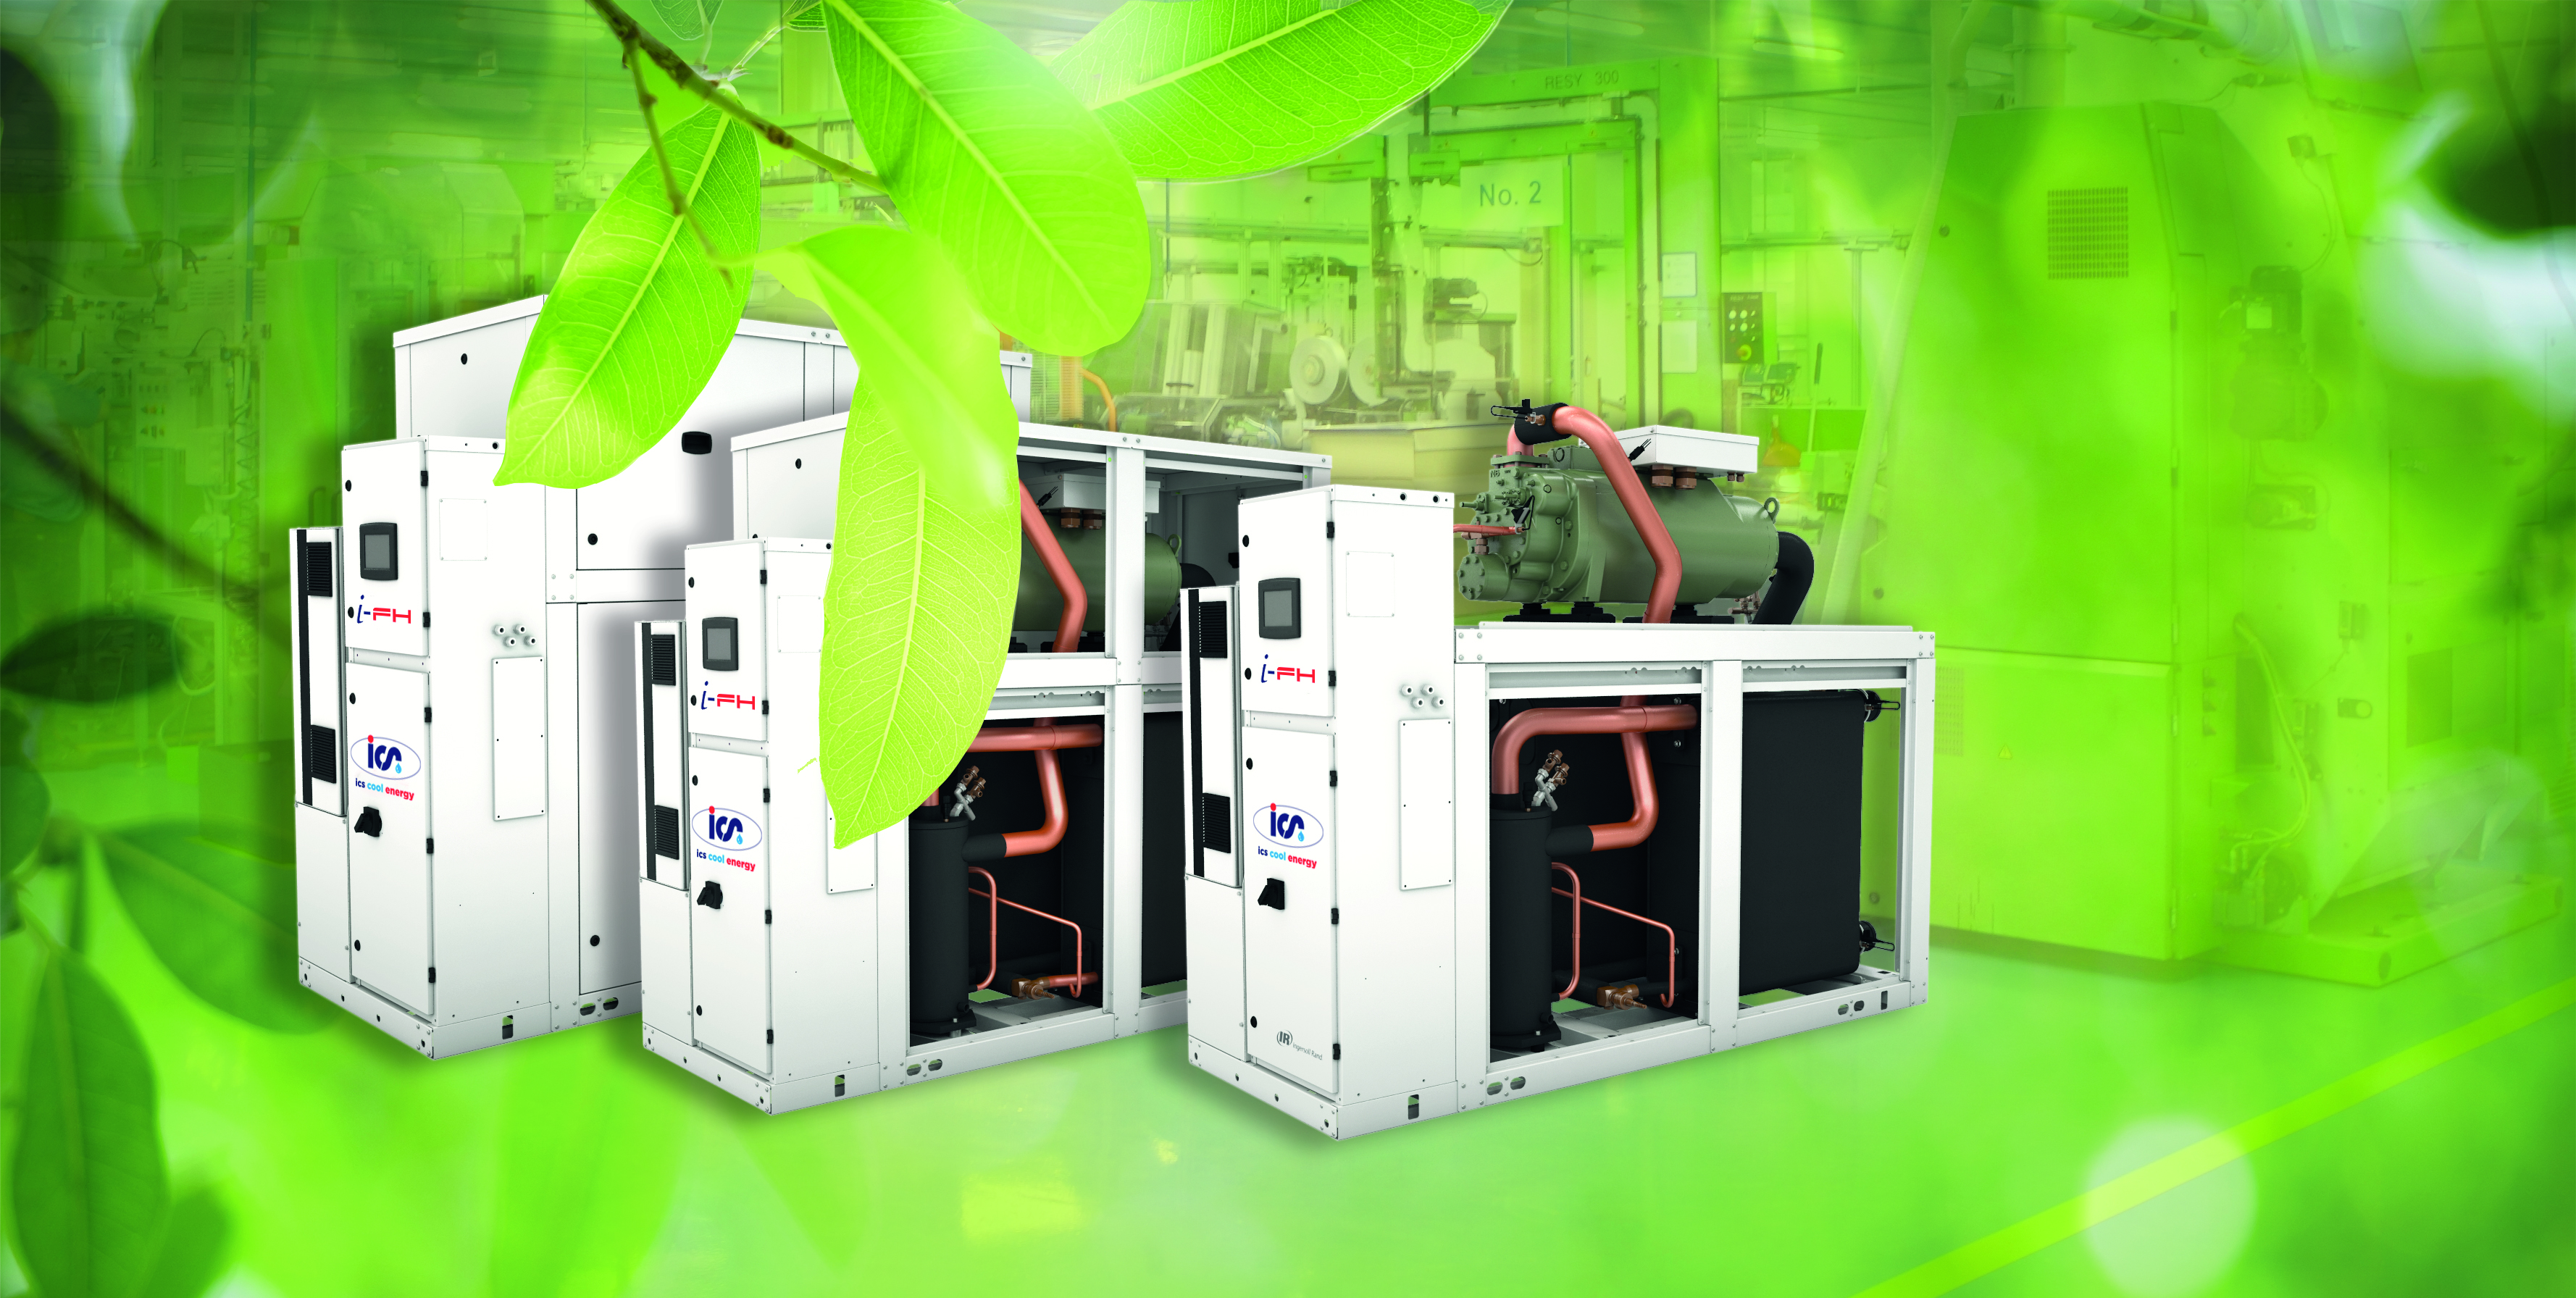  ICS Cool Energy Boost Free Heating Opportunities Adding i-FH Heat Pumps to its Hire Fleet 